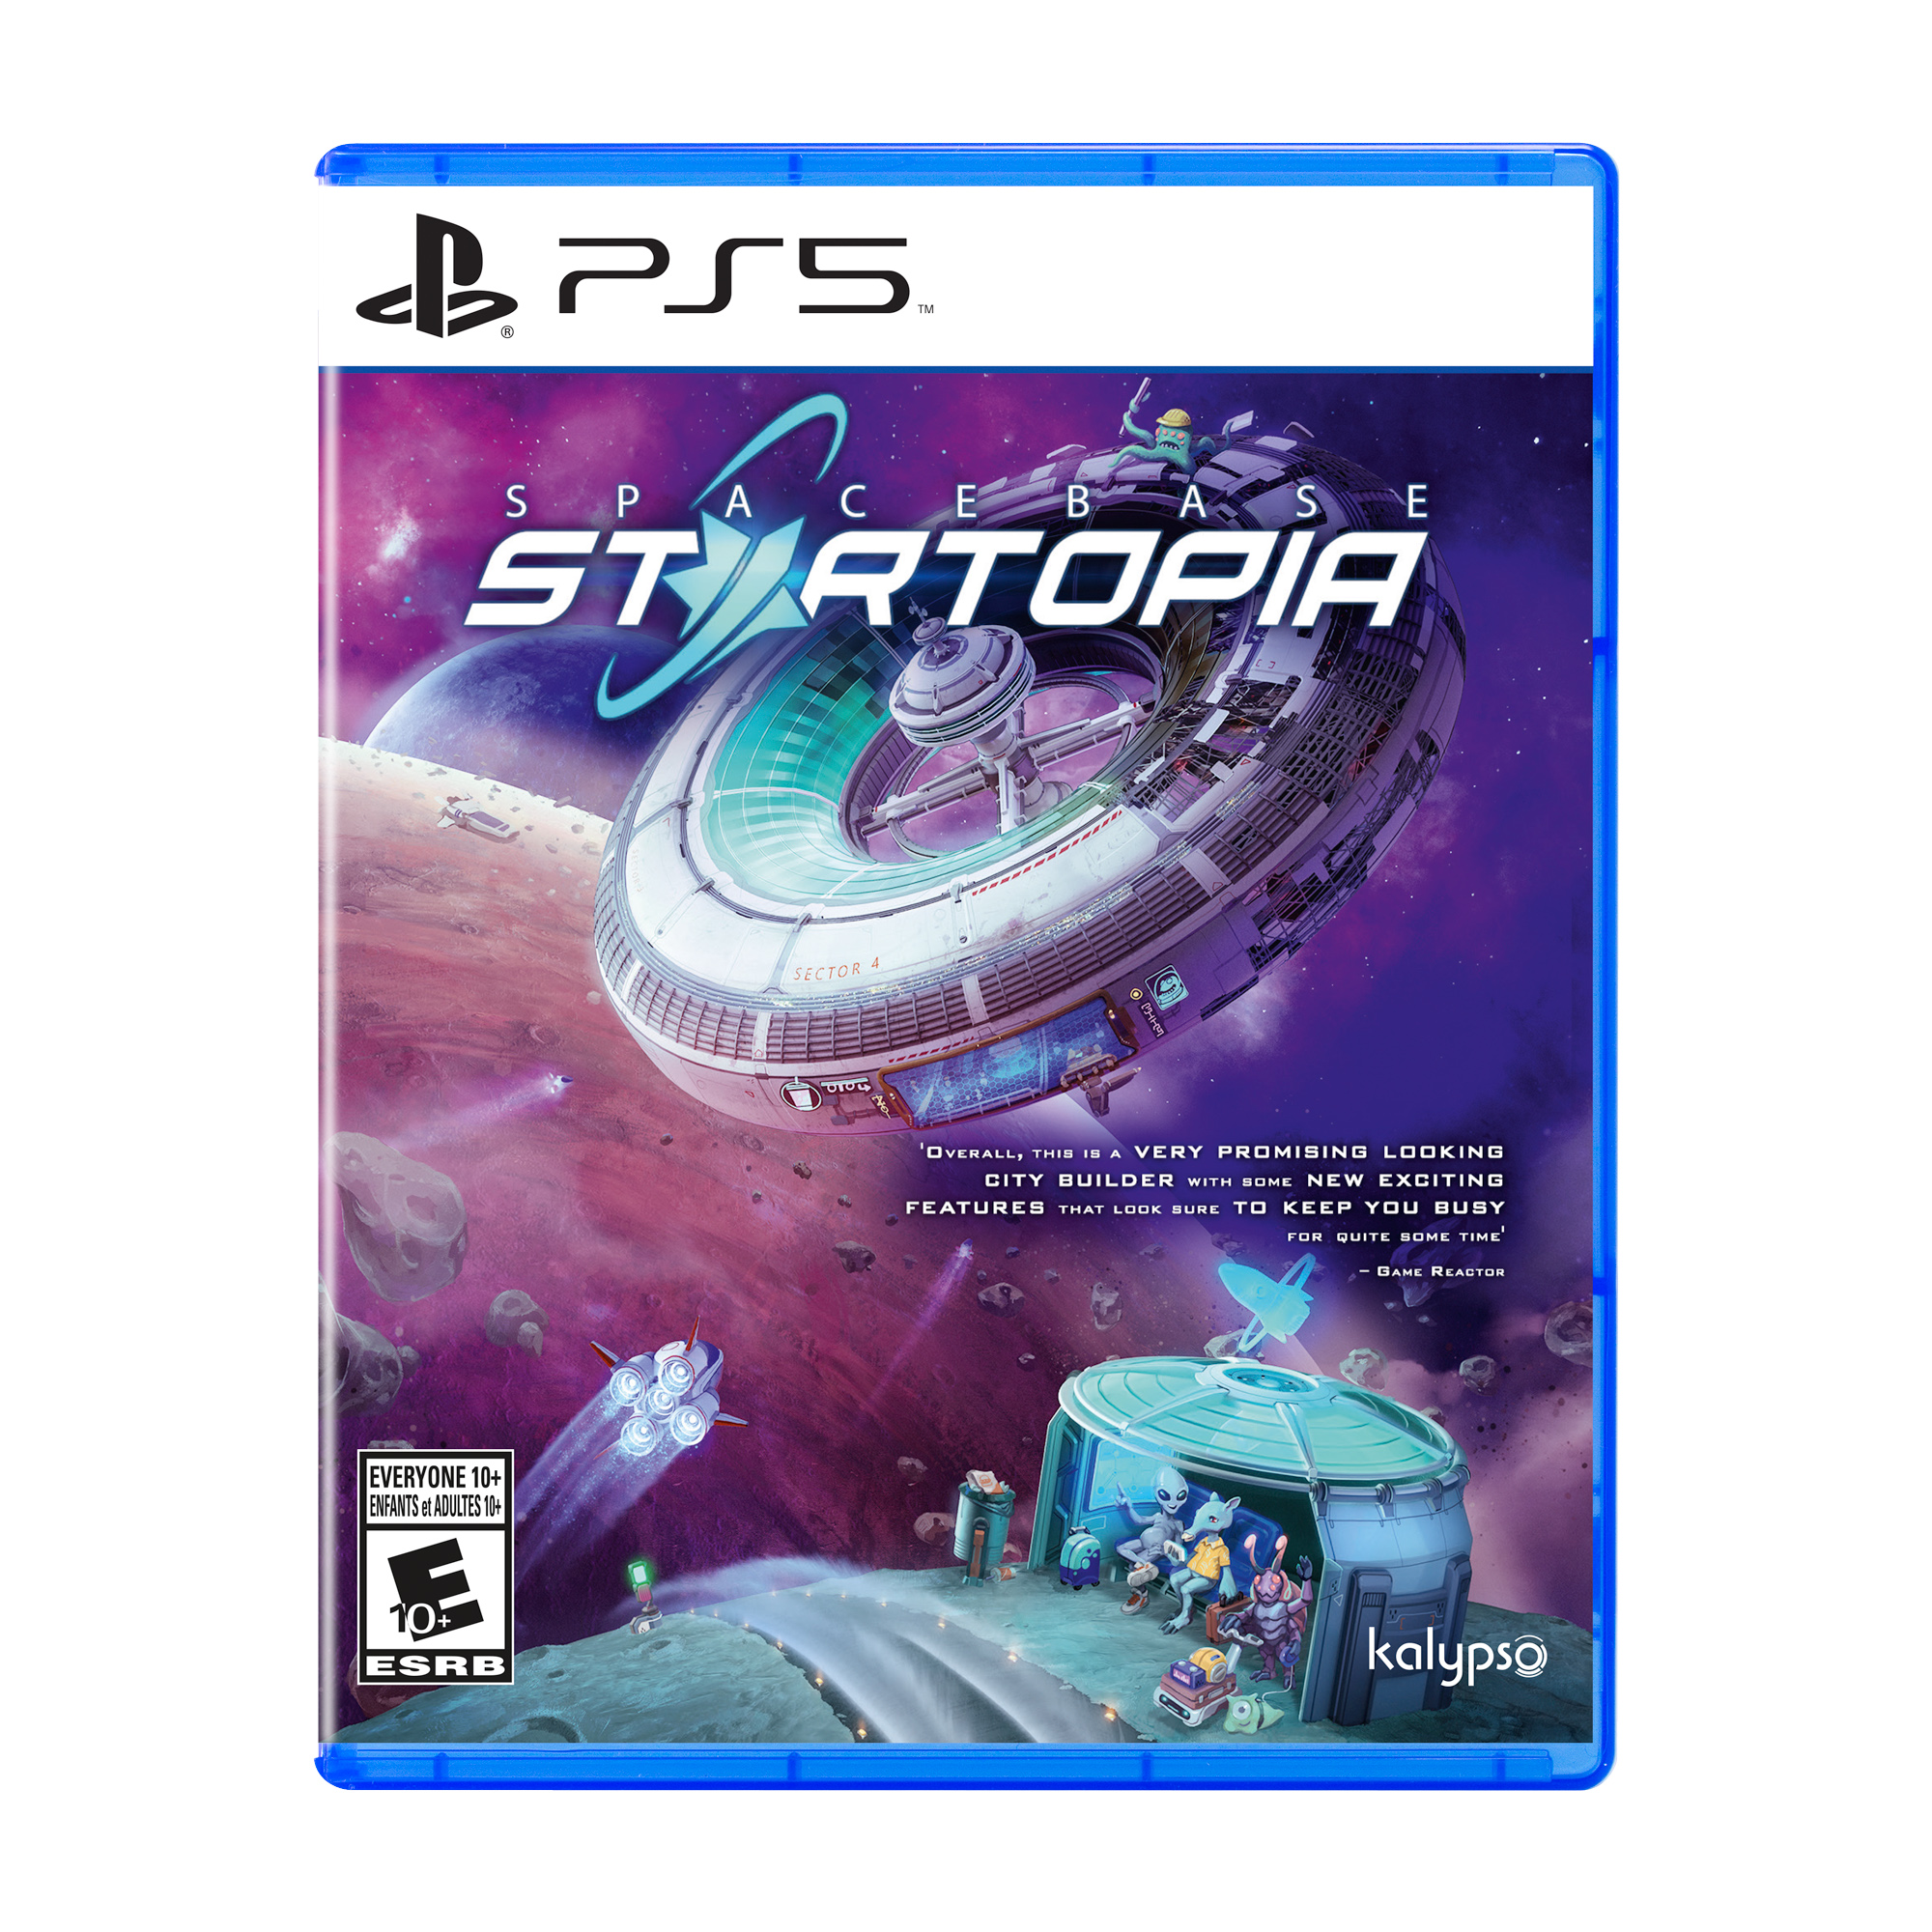 Spacebase Startopia, THQ-Nordic Inc., PlayStation 5, [Physical], 816819018651 - image 1 of 7